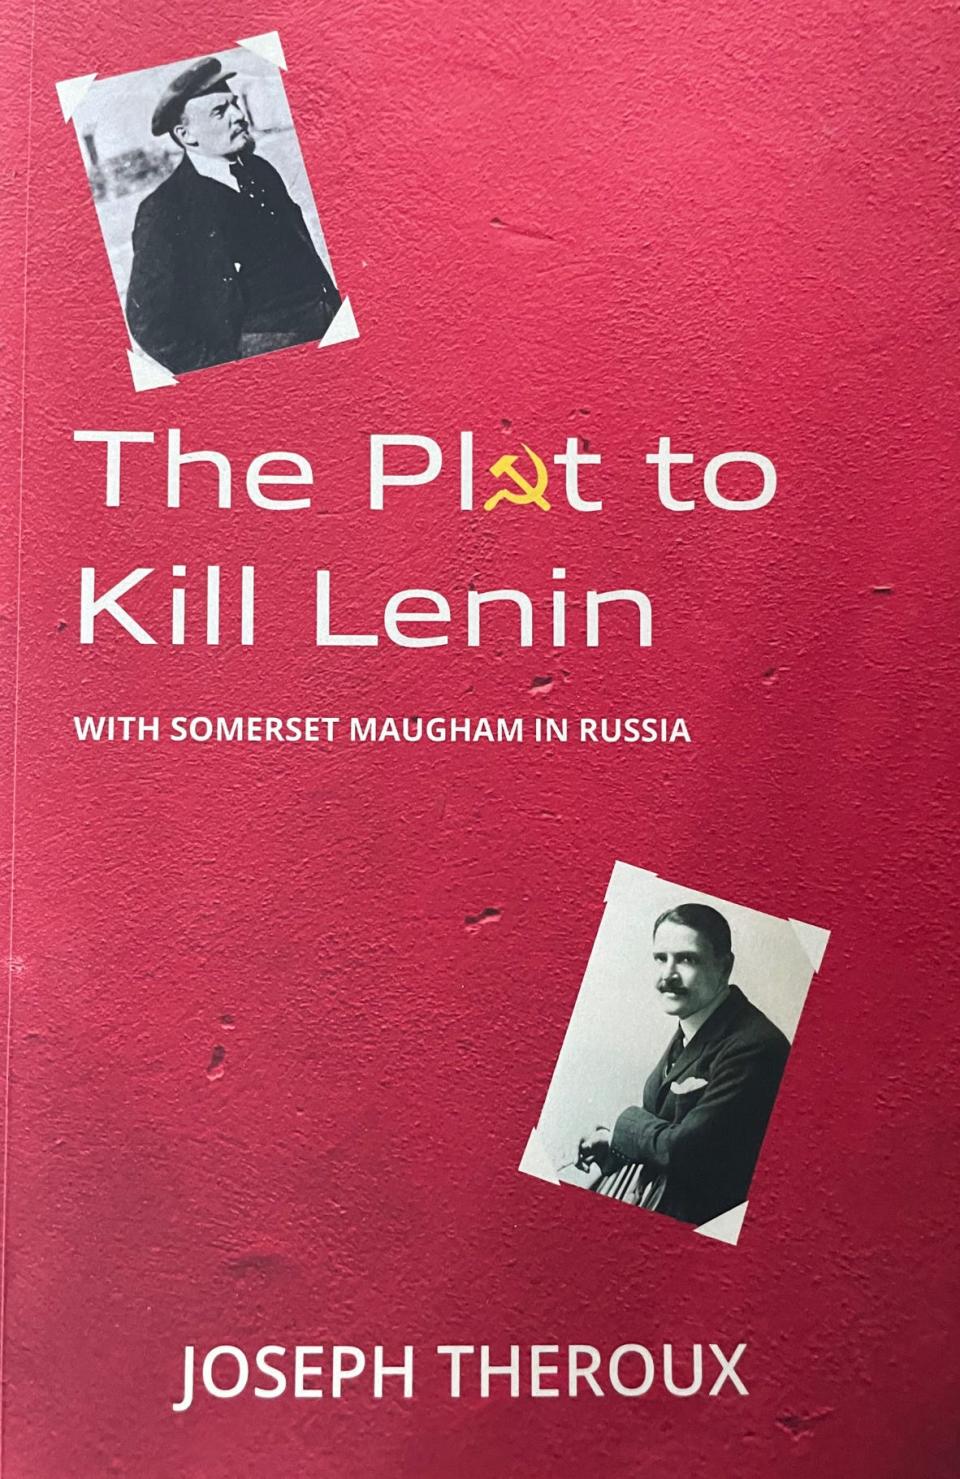 “The Plot to Kill Lenin: With Somerset Maugham in Russia,” by Joseph Theroux